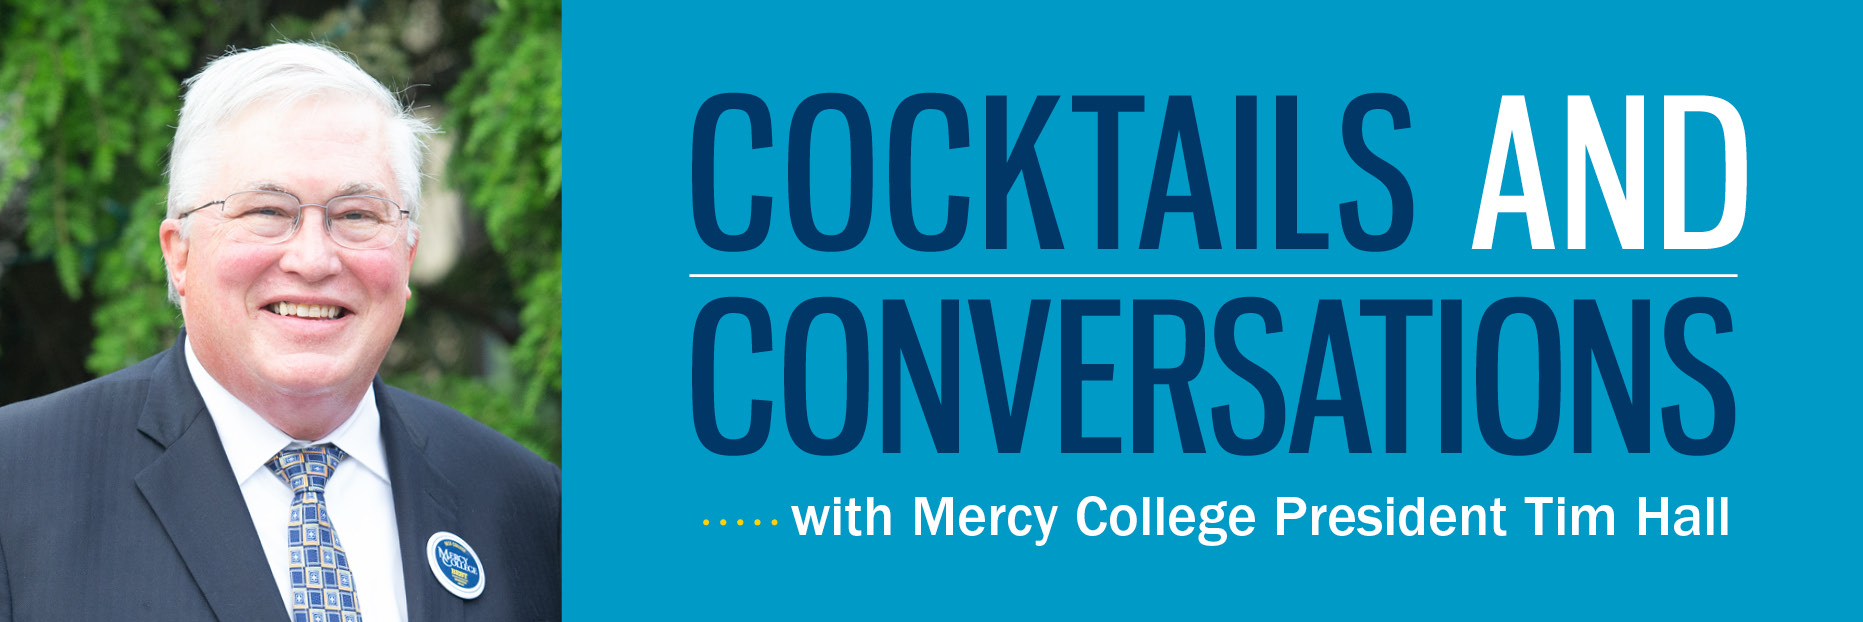 Cocktails and Conversations with President Hall